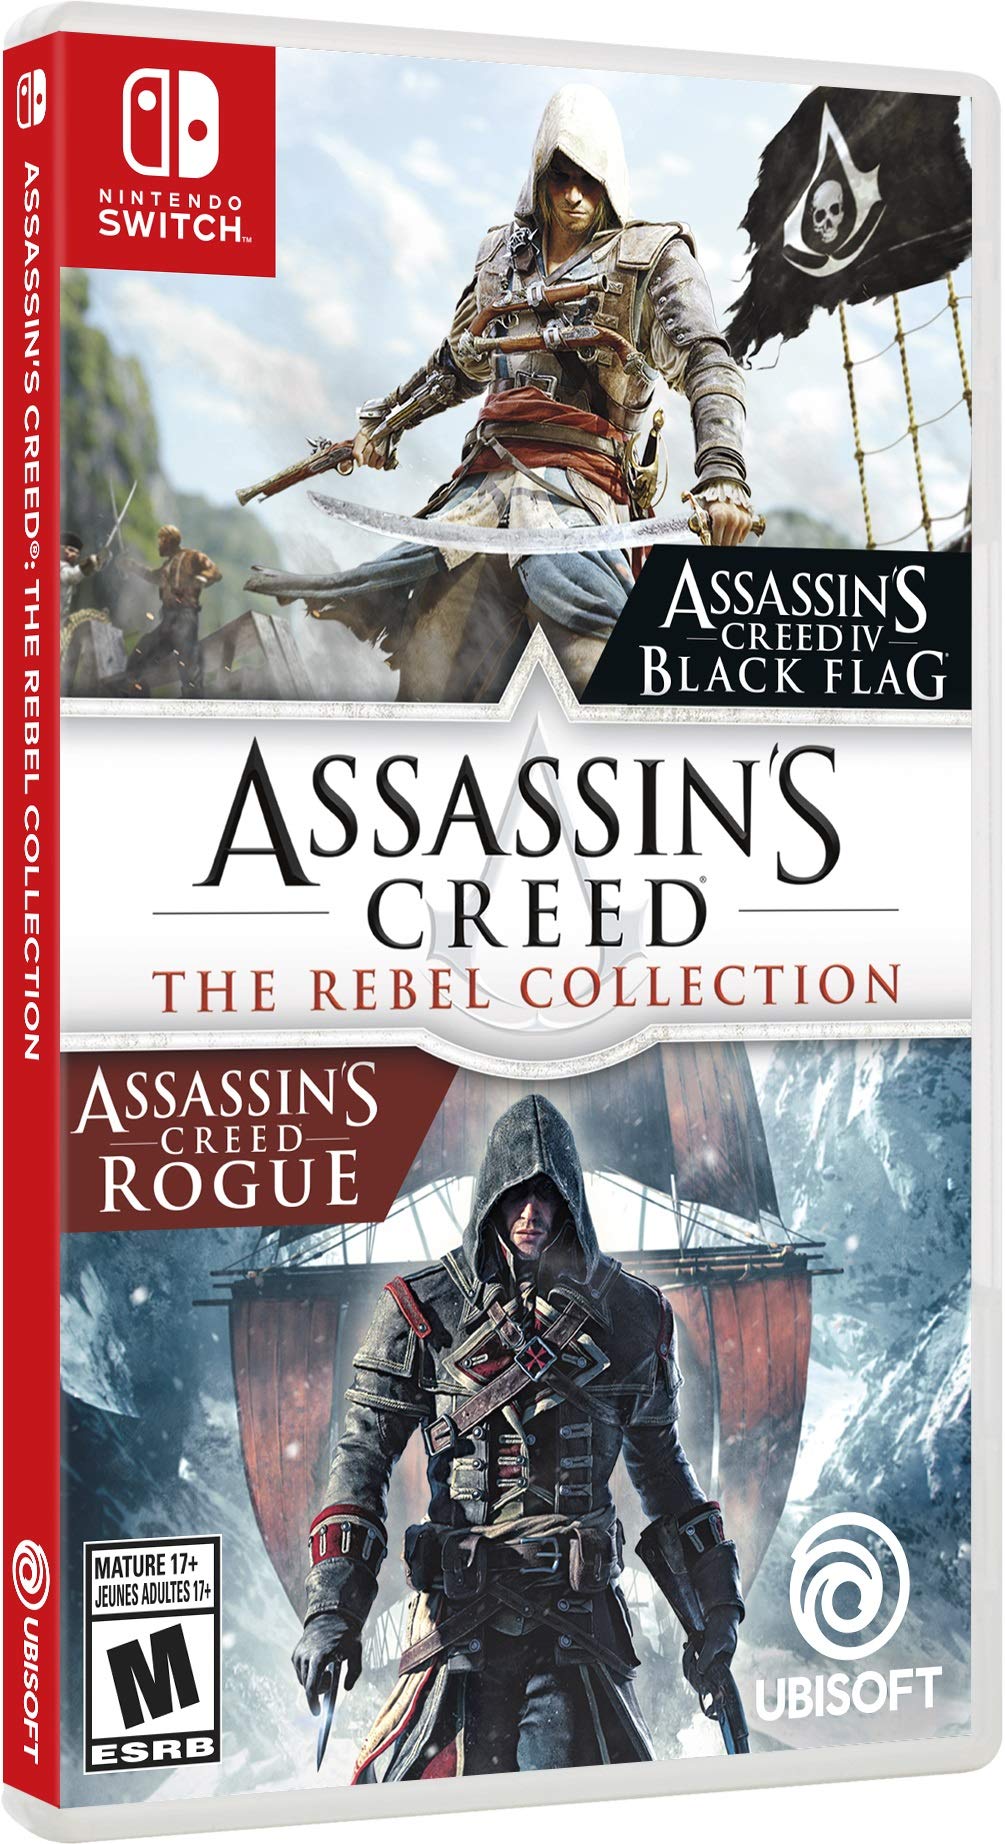 Assassin's Creed: The Rebel Collection (Nintendo Switch, Physical) $14.97 + Free Shipping w/ Prime or on $35+